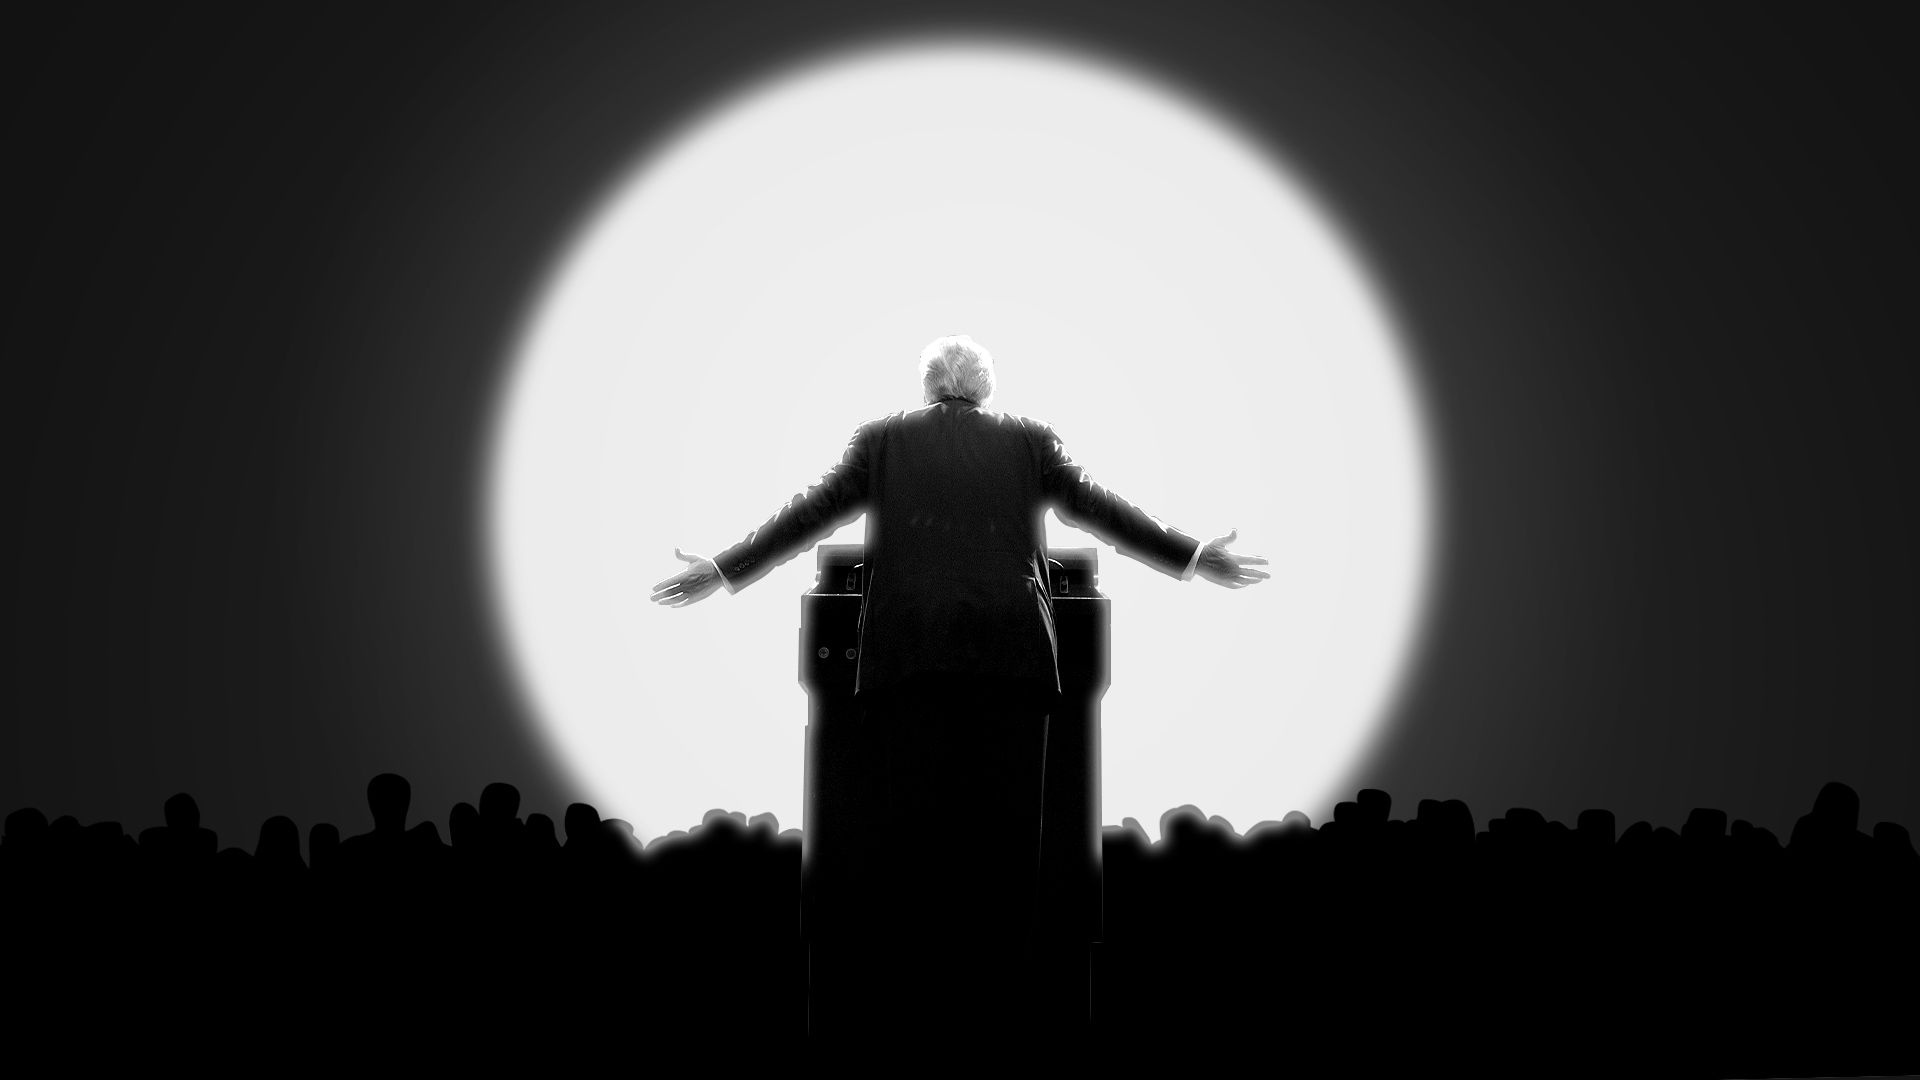 Photo illustration of President Trump in front of a crowd with a giant spotlight on him.